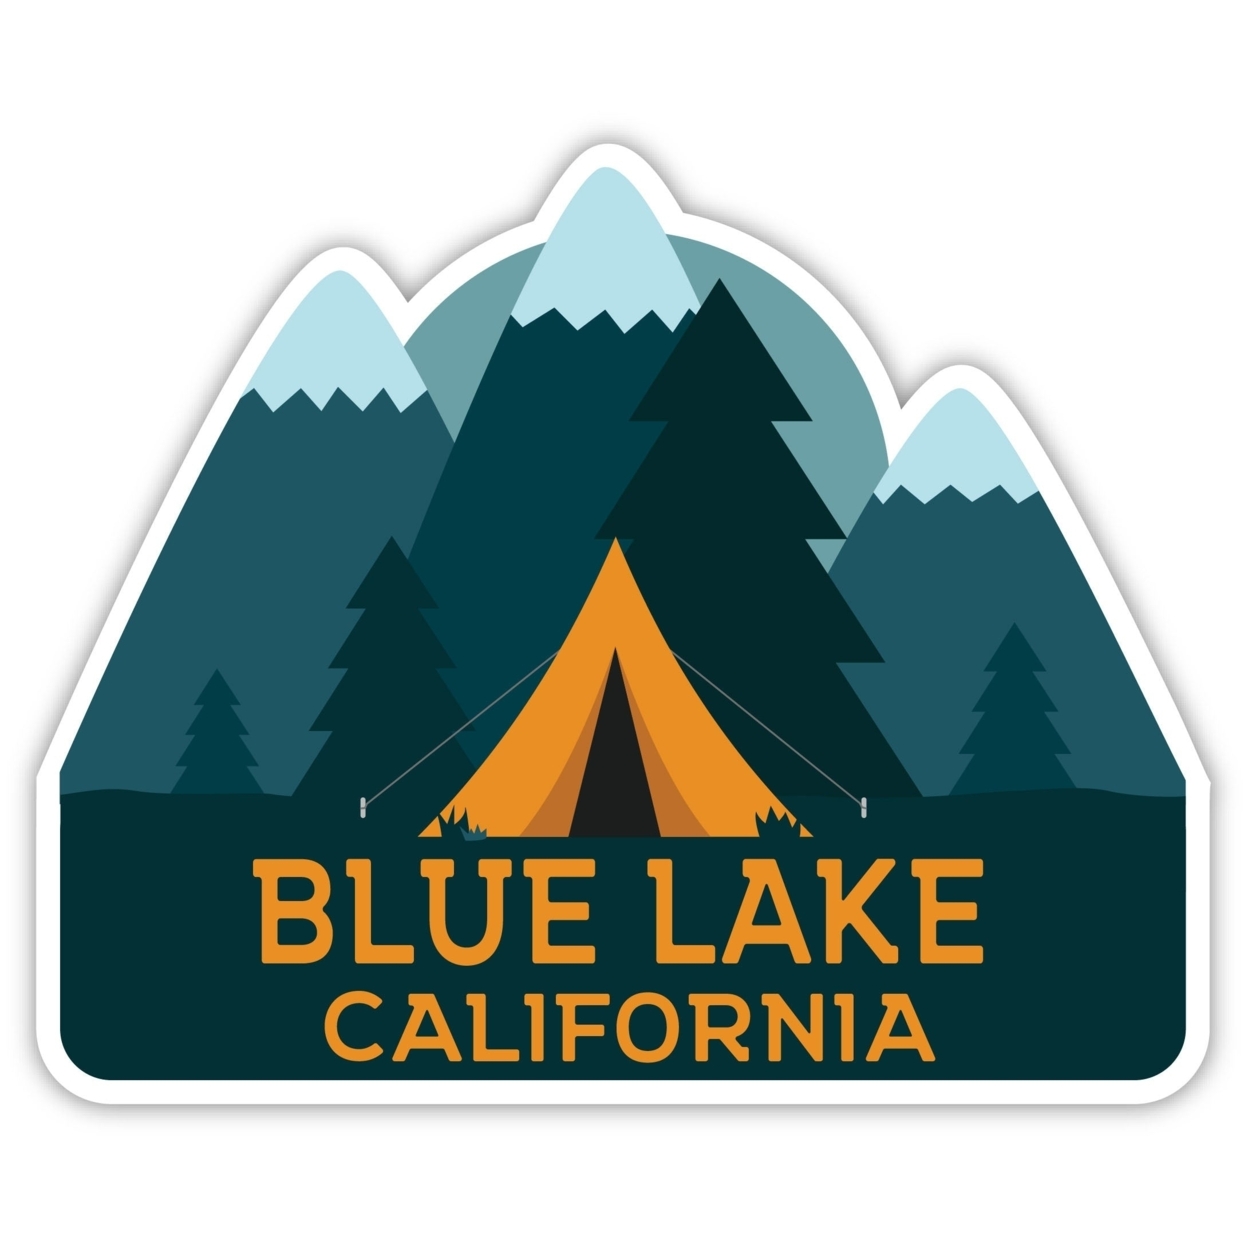 Blue Lake California Souvenir Decorative Stickers (Choose Theme And Size) - 4-Pack, 8-Inch, Tent